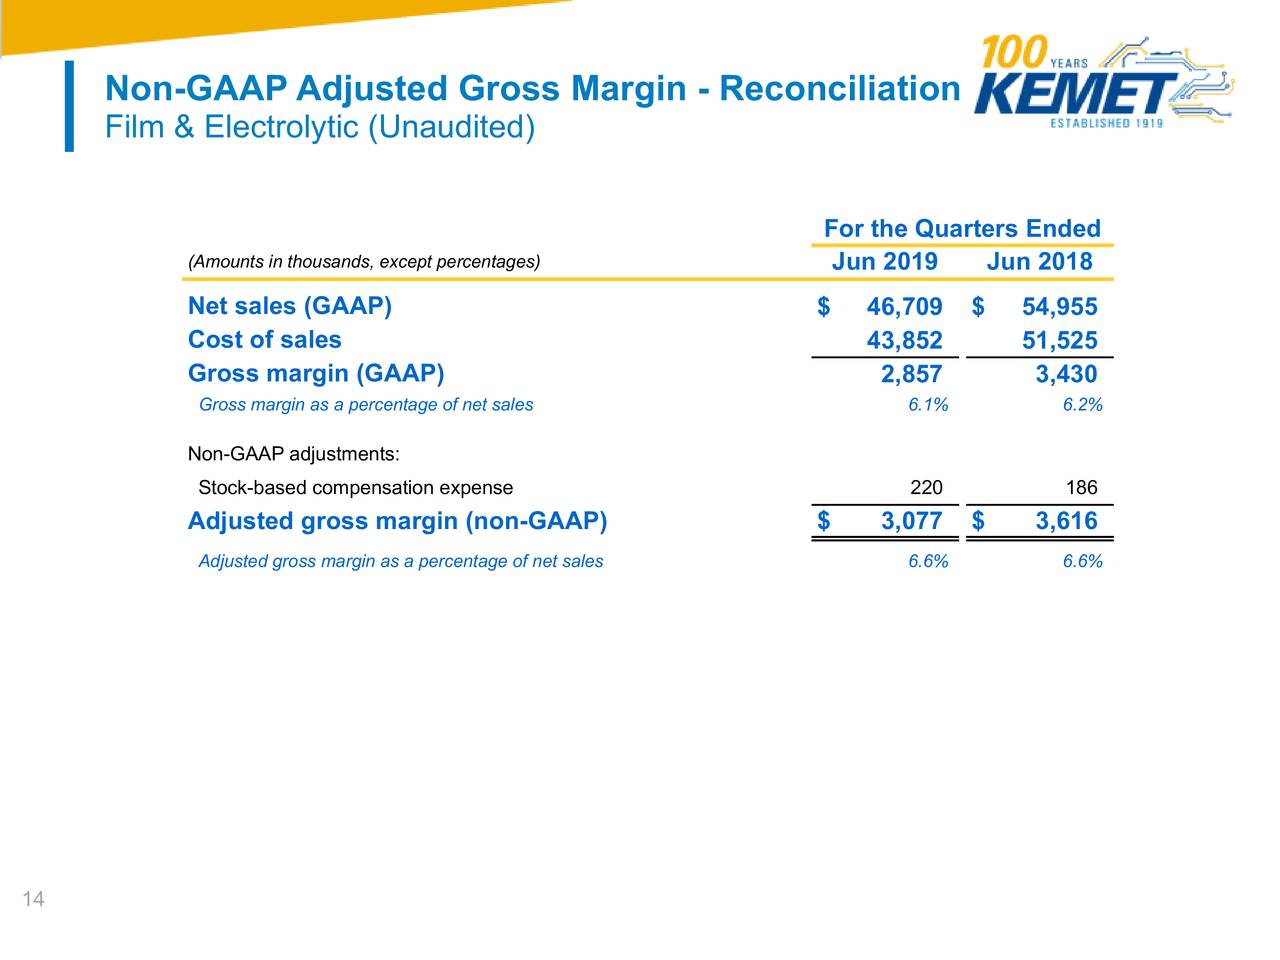 Non-GAAP Adjusted Gross Margin - Reconciliation